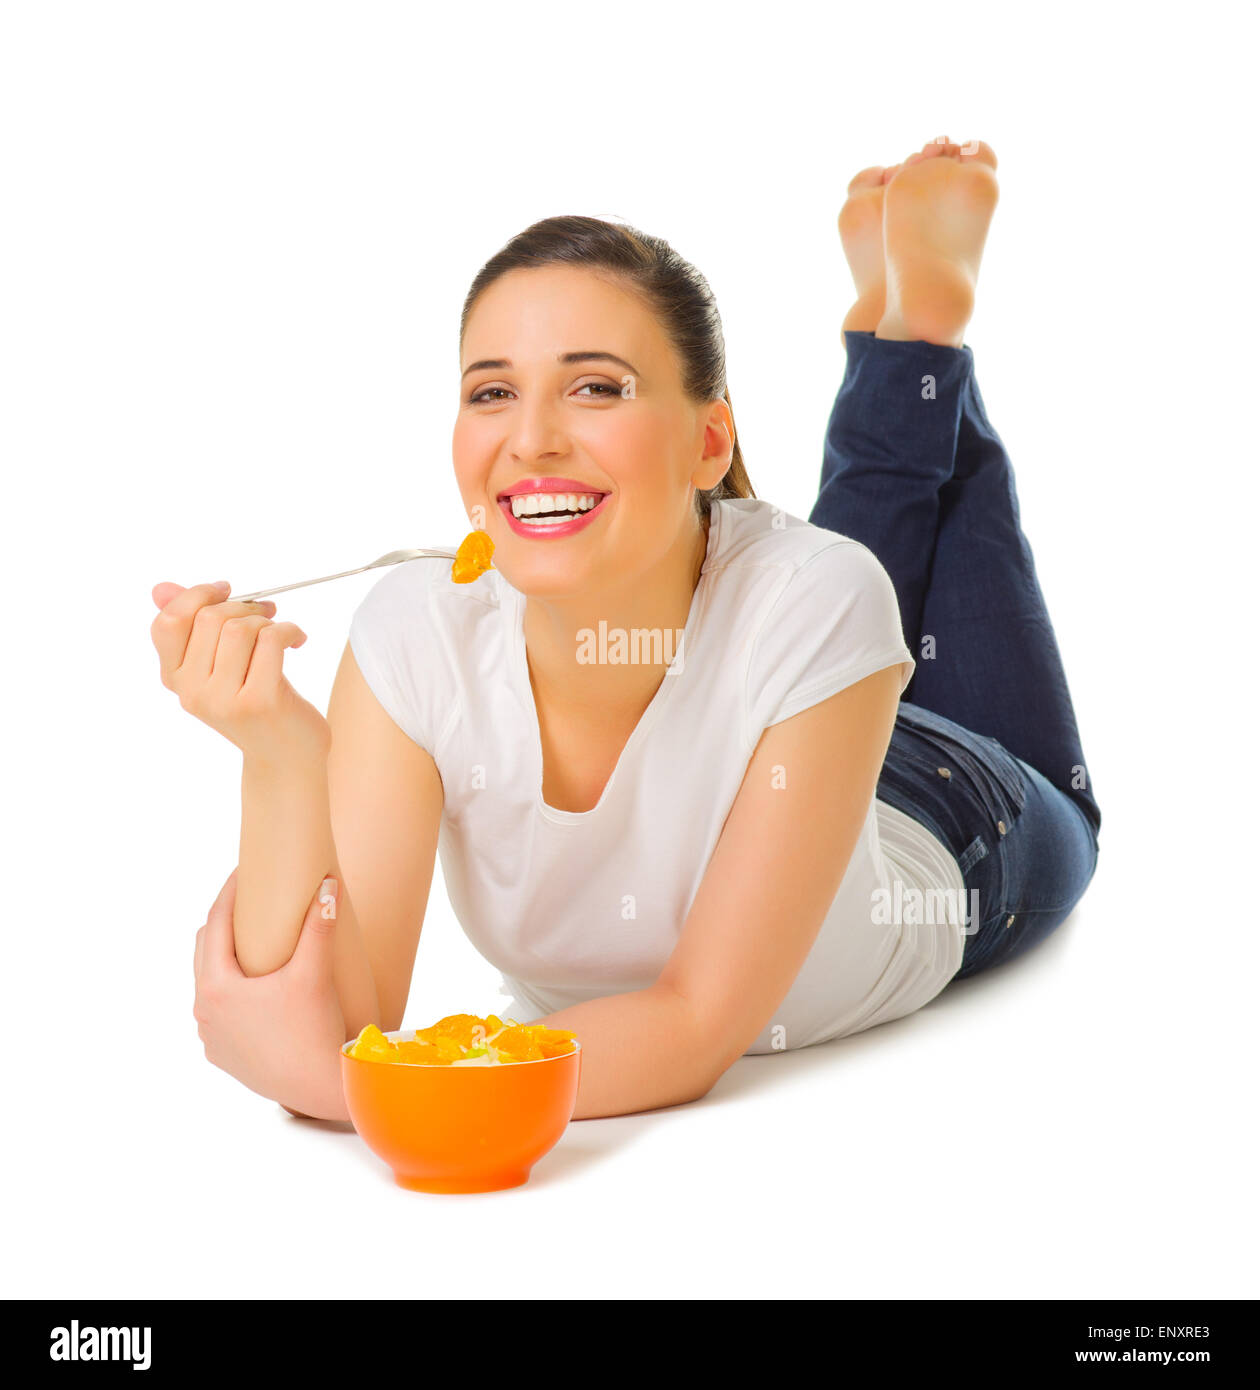 Young girl laying on the floor with fruit salad isolated Stock Photo